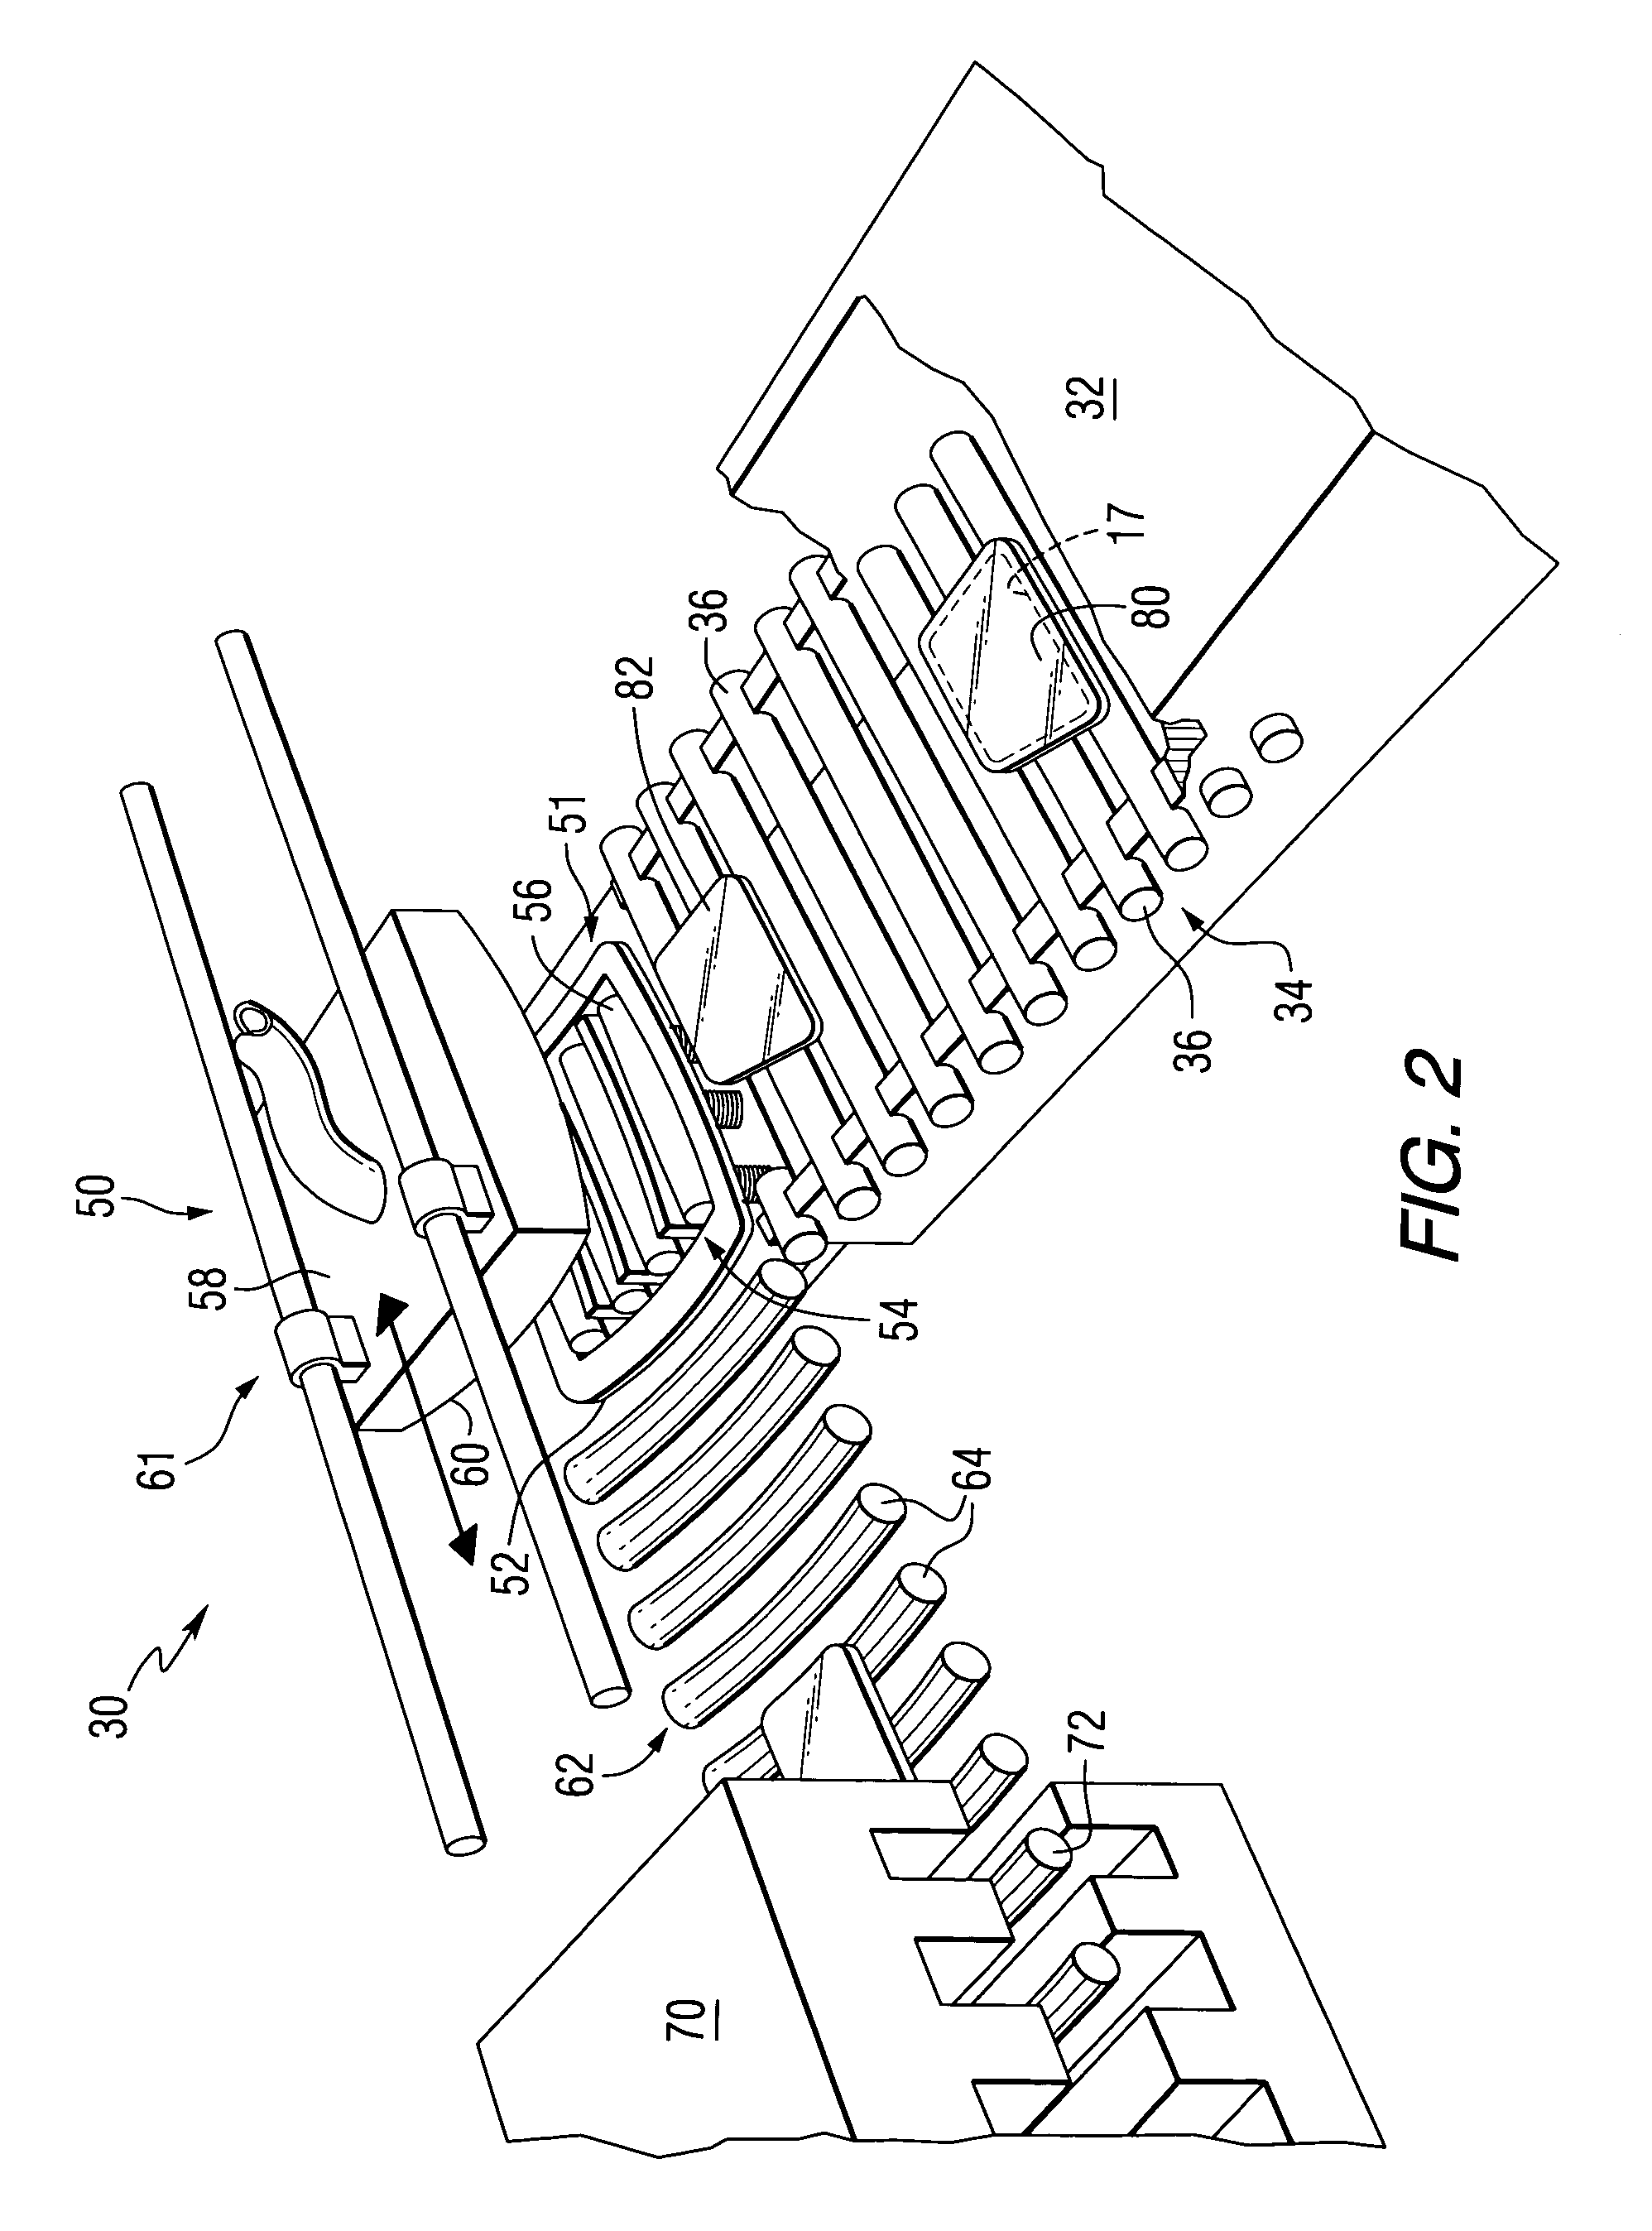 Method of making coated articles and coated articles made thereby